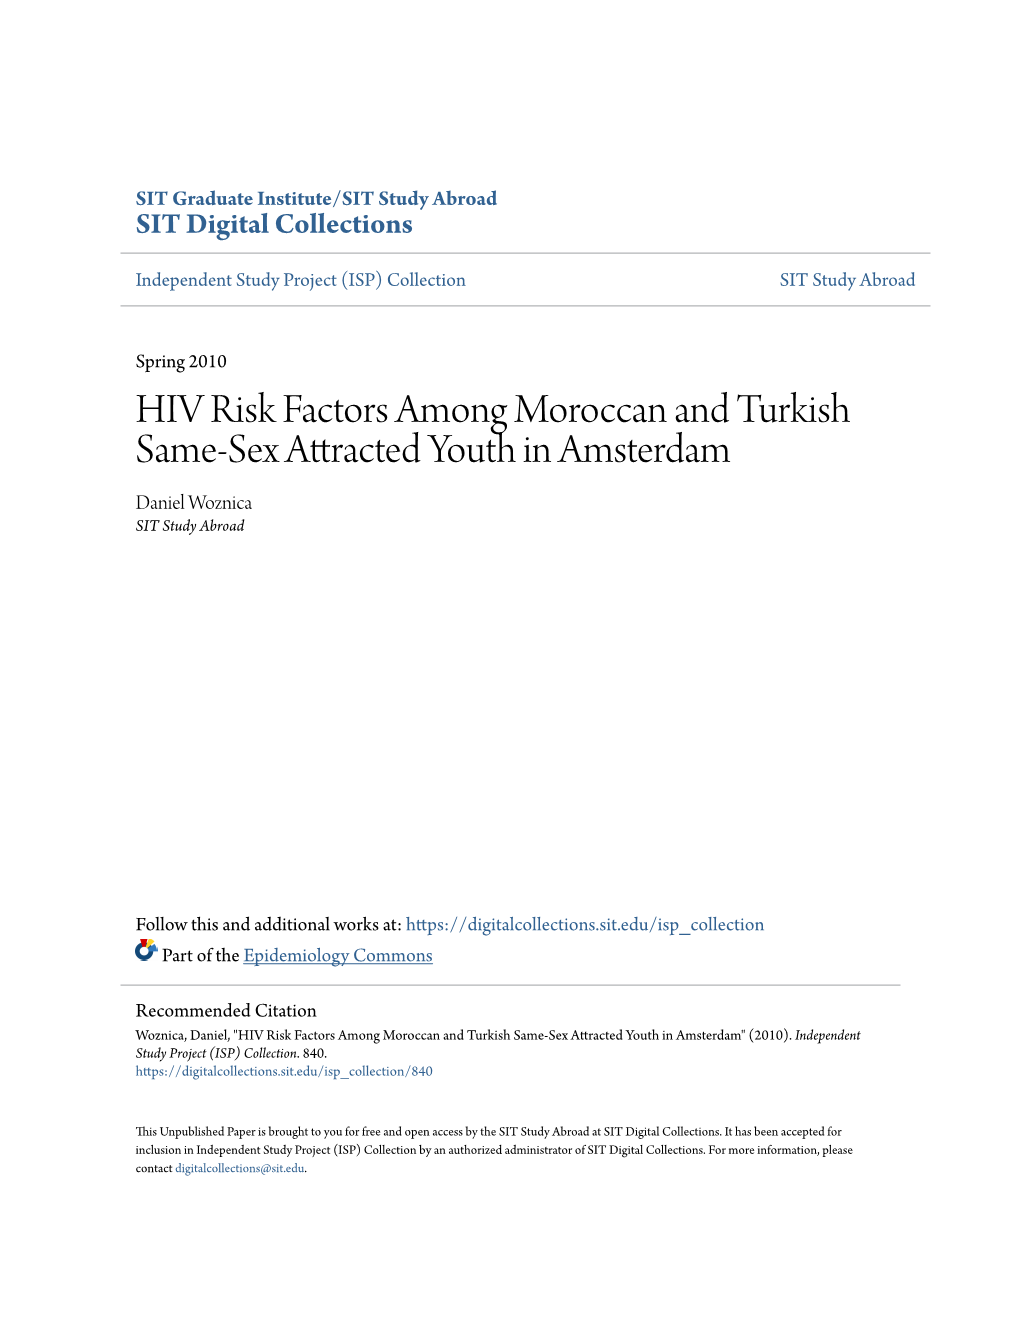 HIV Risk Factors Among Moroccan and Turkish Same-Sex Attracted Youth in Amsterdam Daniel Woznica SIT Study Abroad